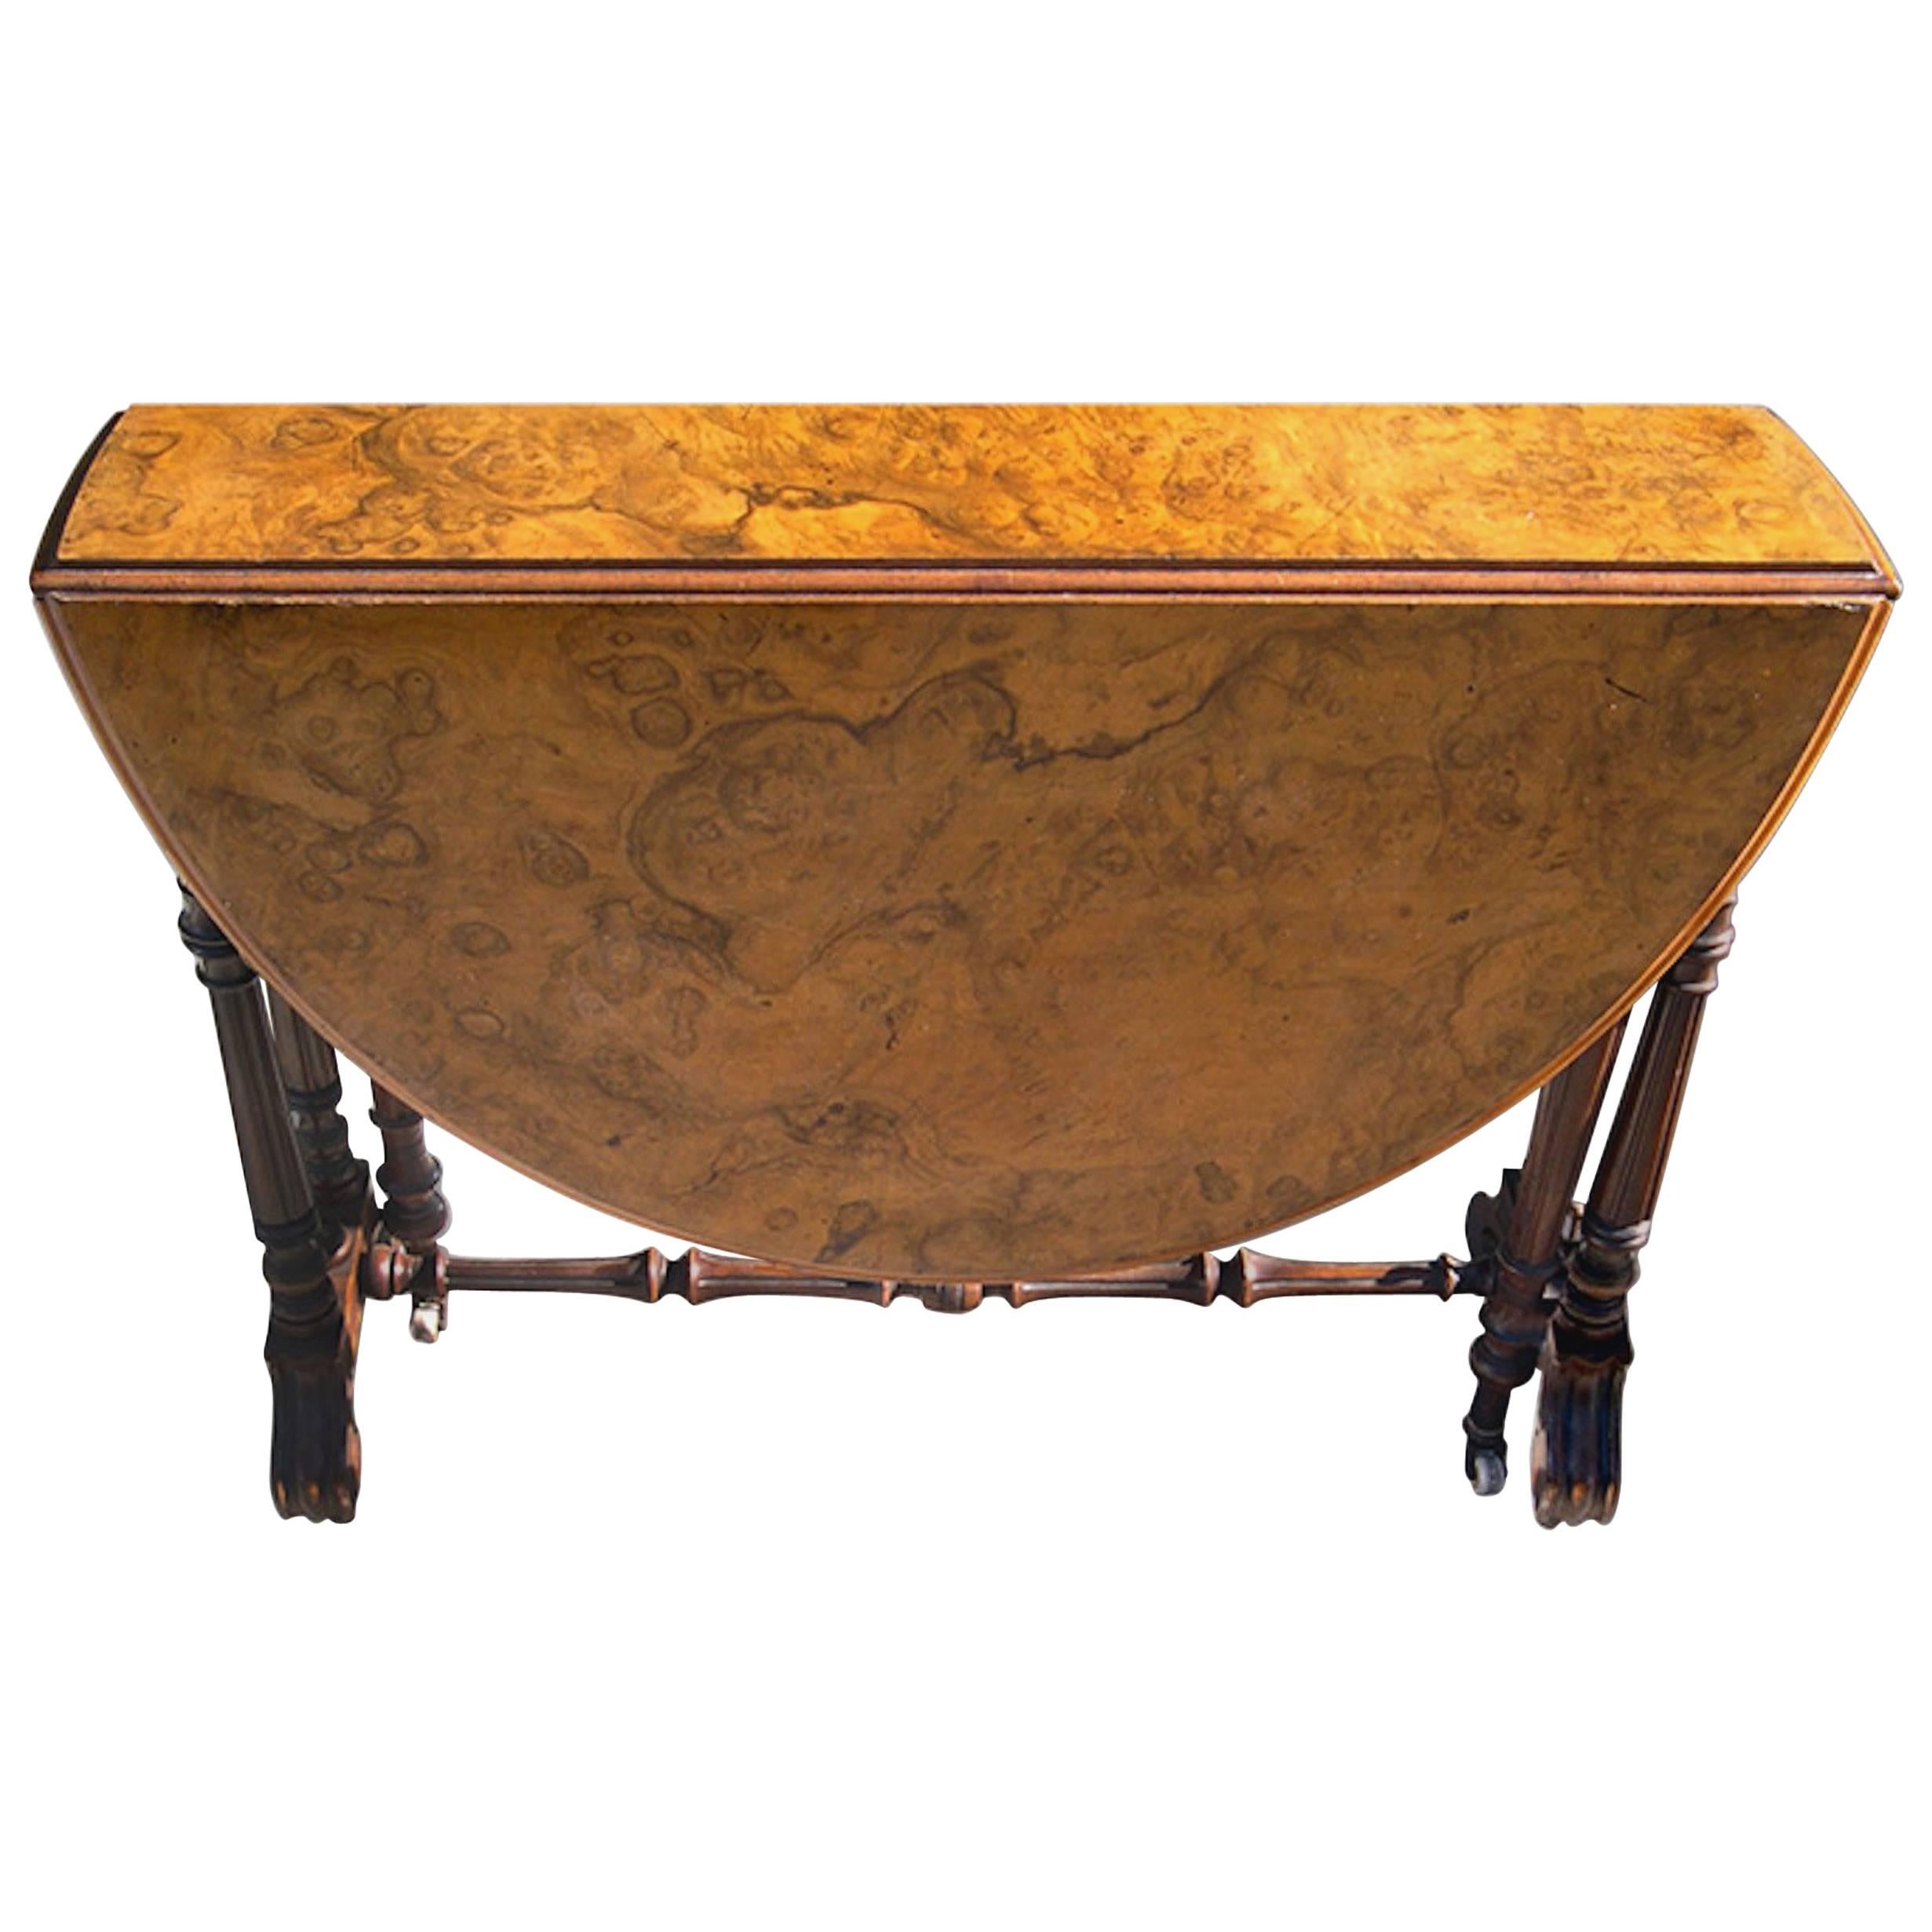 English 19th Century Burl Walnut Top, Drop-Leaf Table with Carved Legs on Wheels